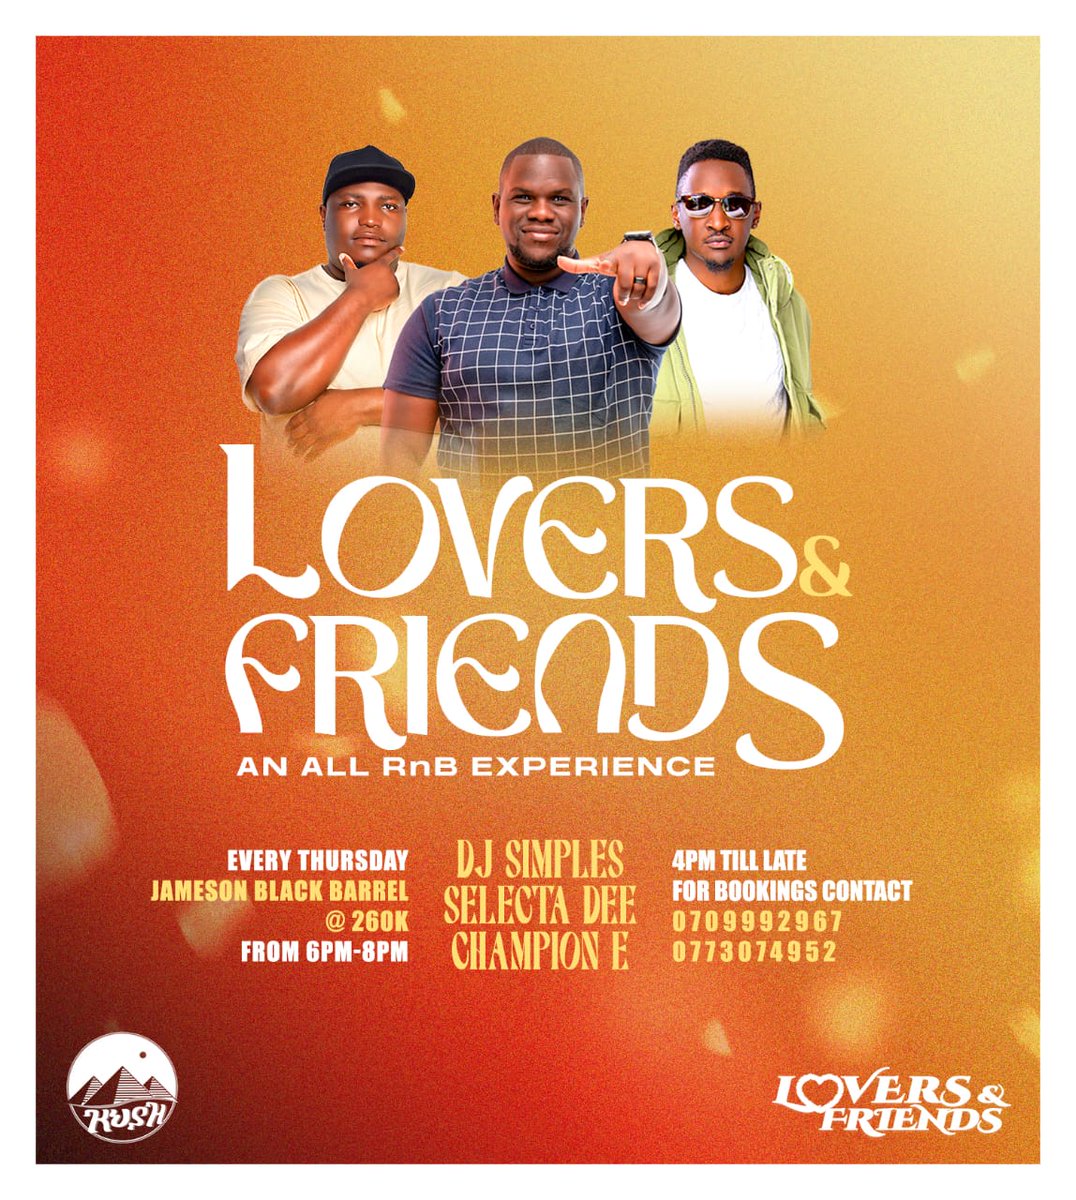 Come thru @kushloungekla laters for some soothing R&B vibes 🔥
#LoversAndFriends